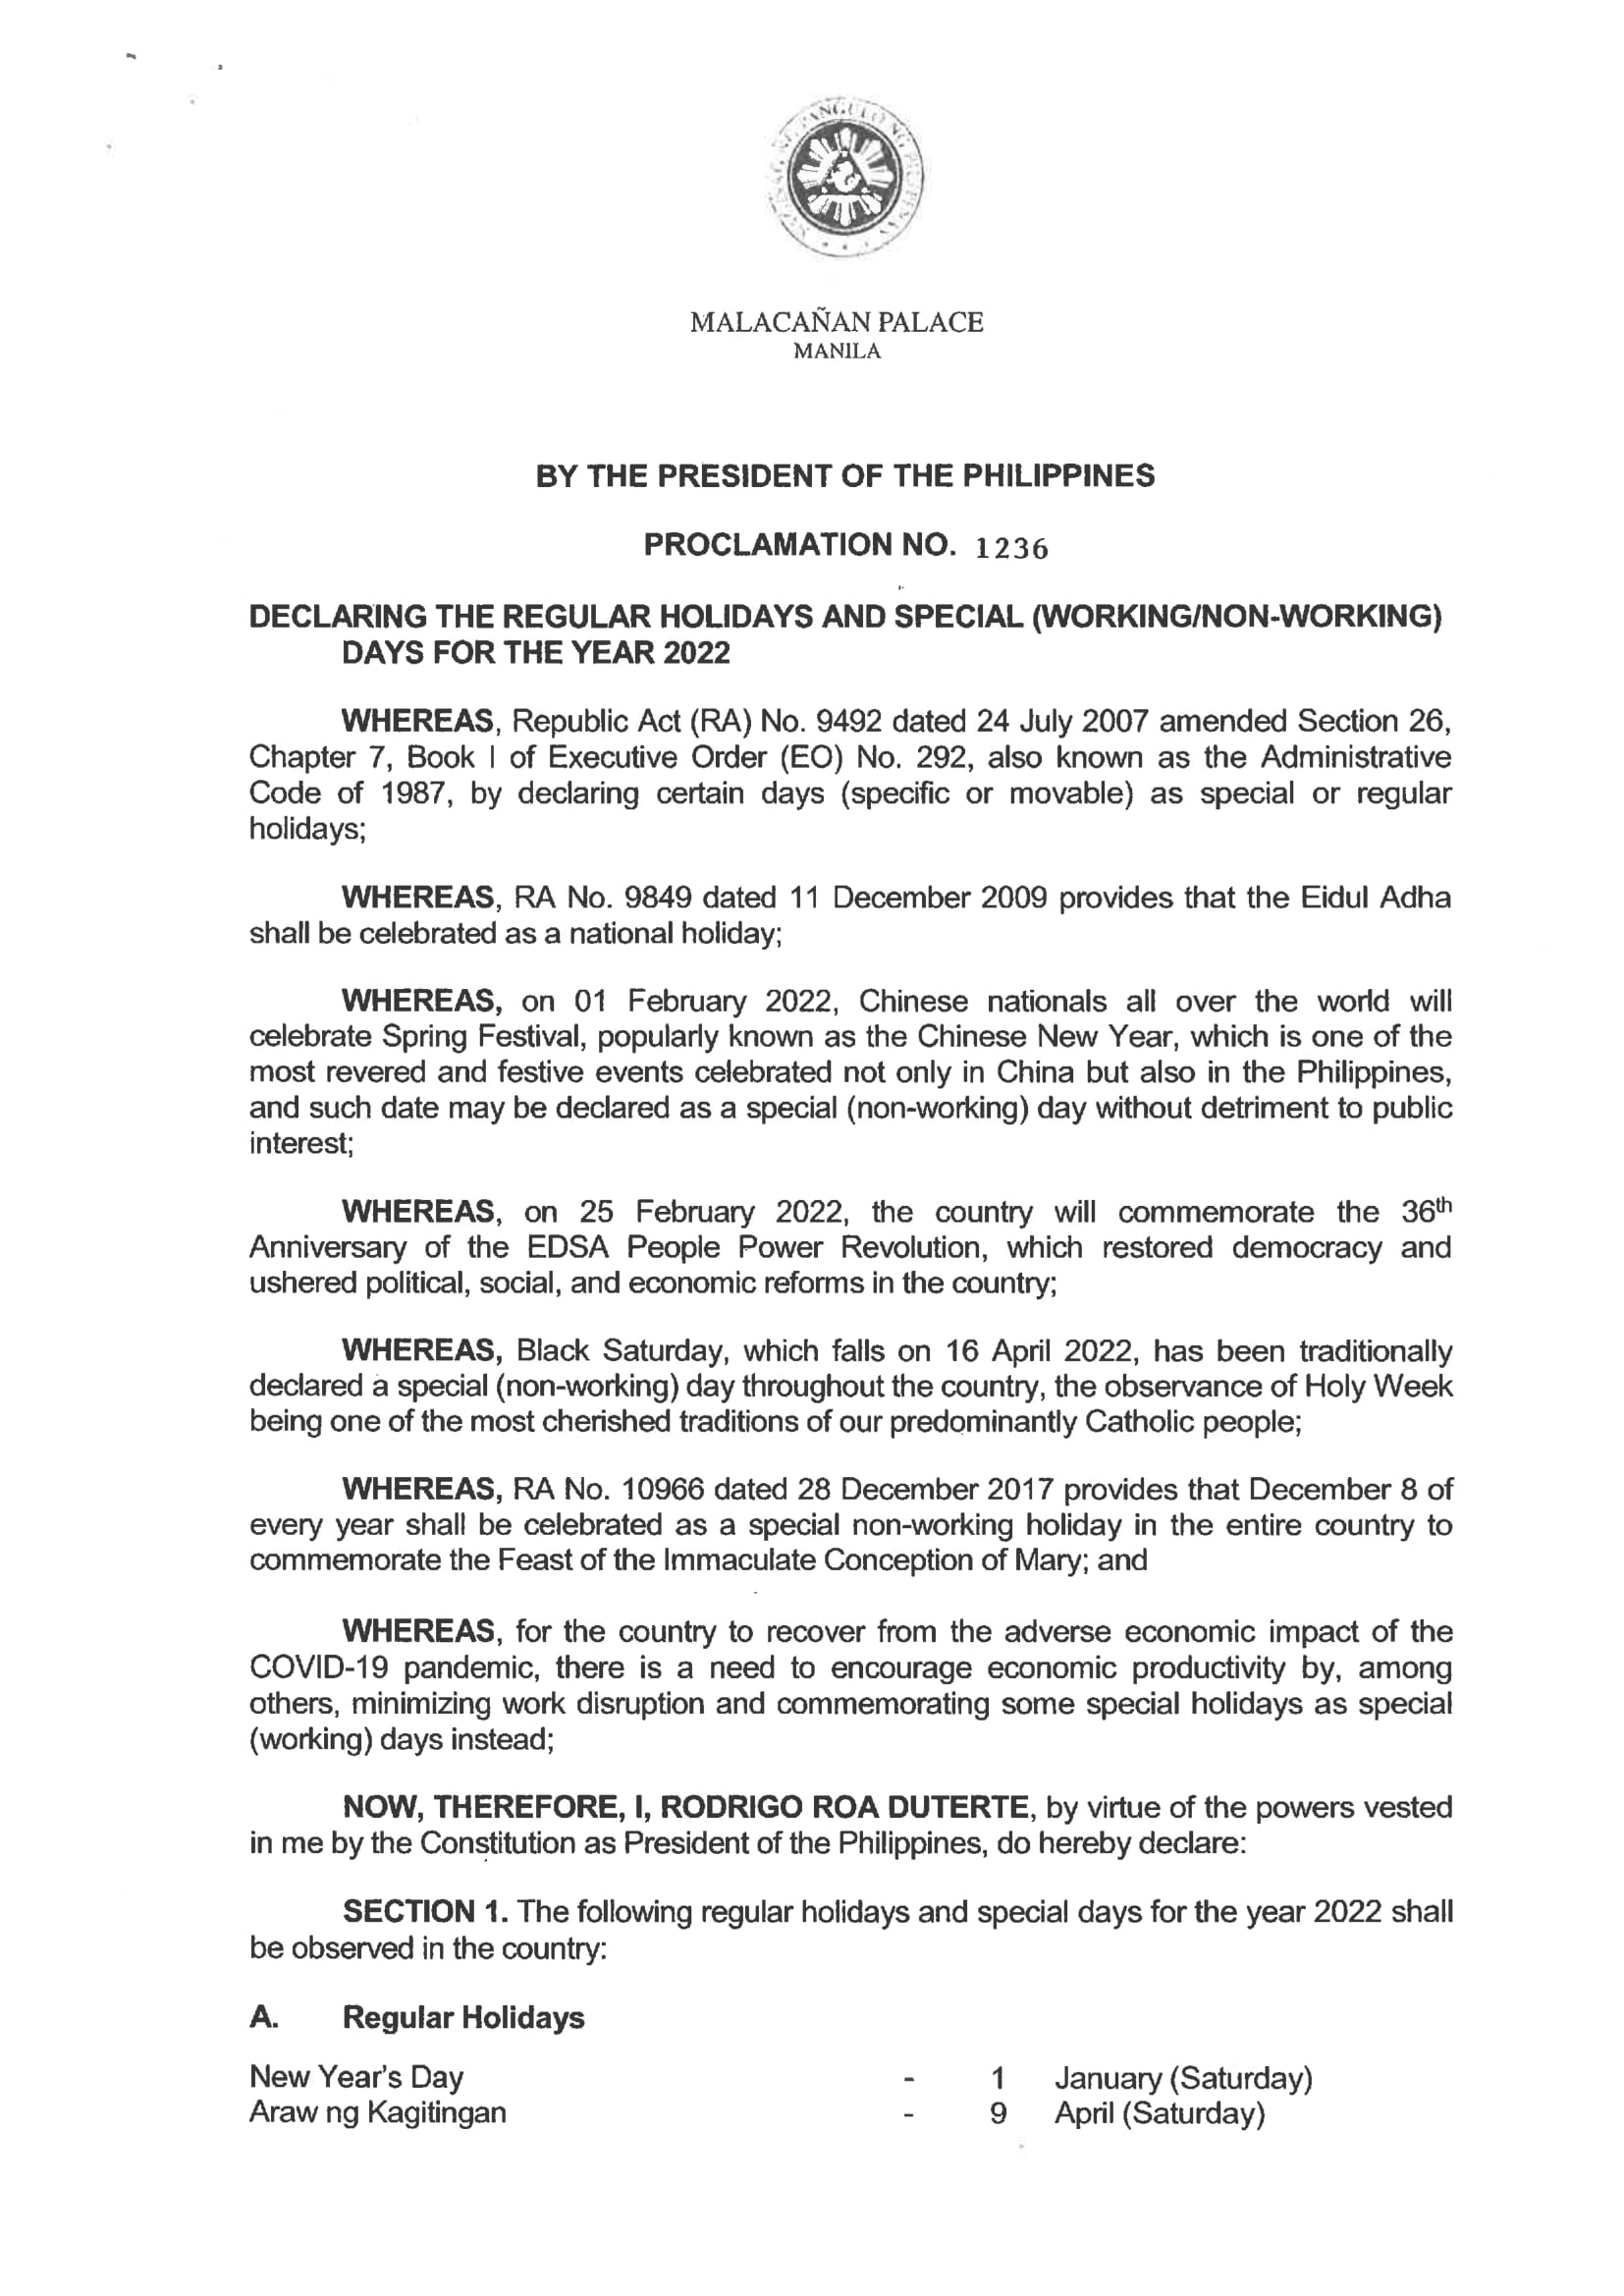 Proclamation No. 1236 Declaring the regular holidays and special